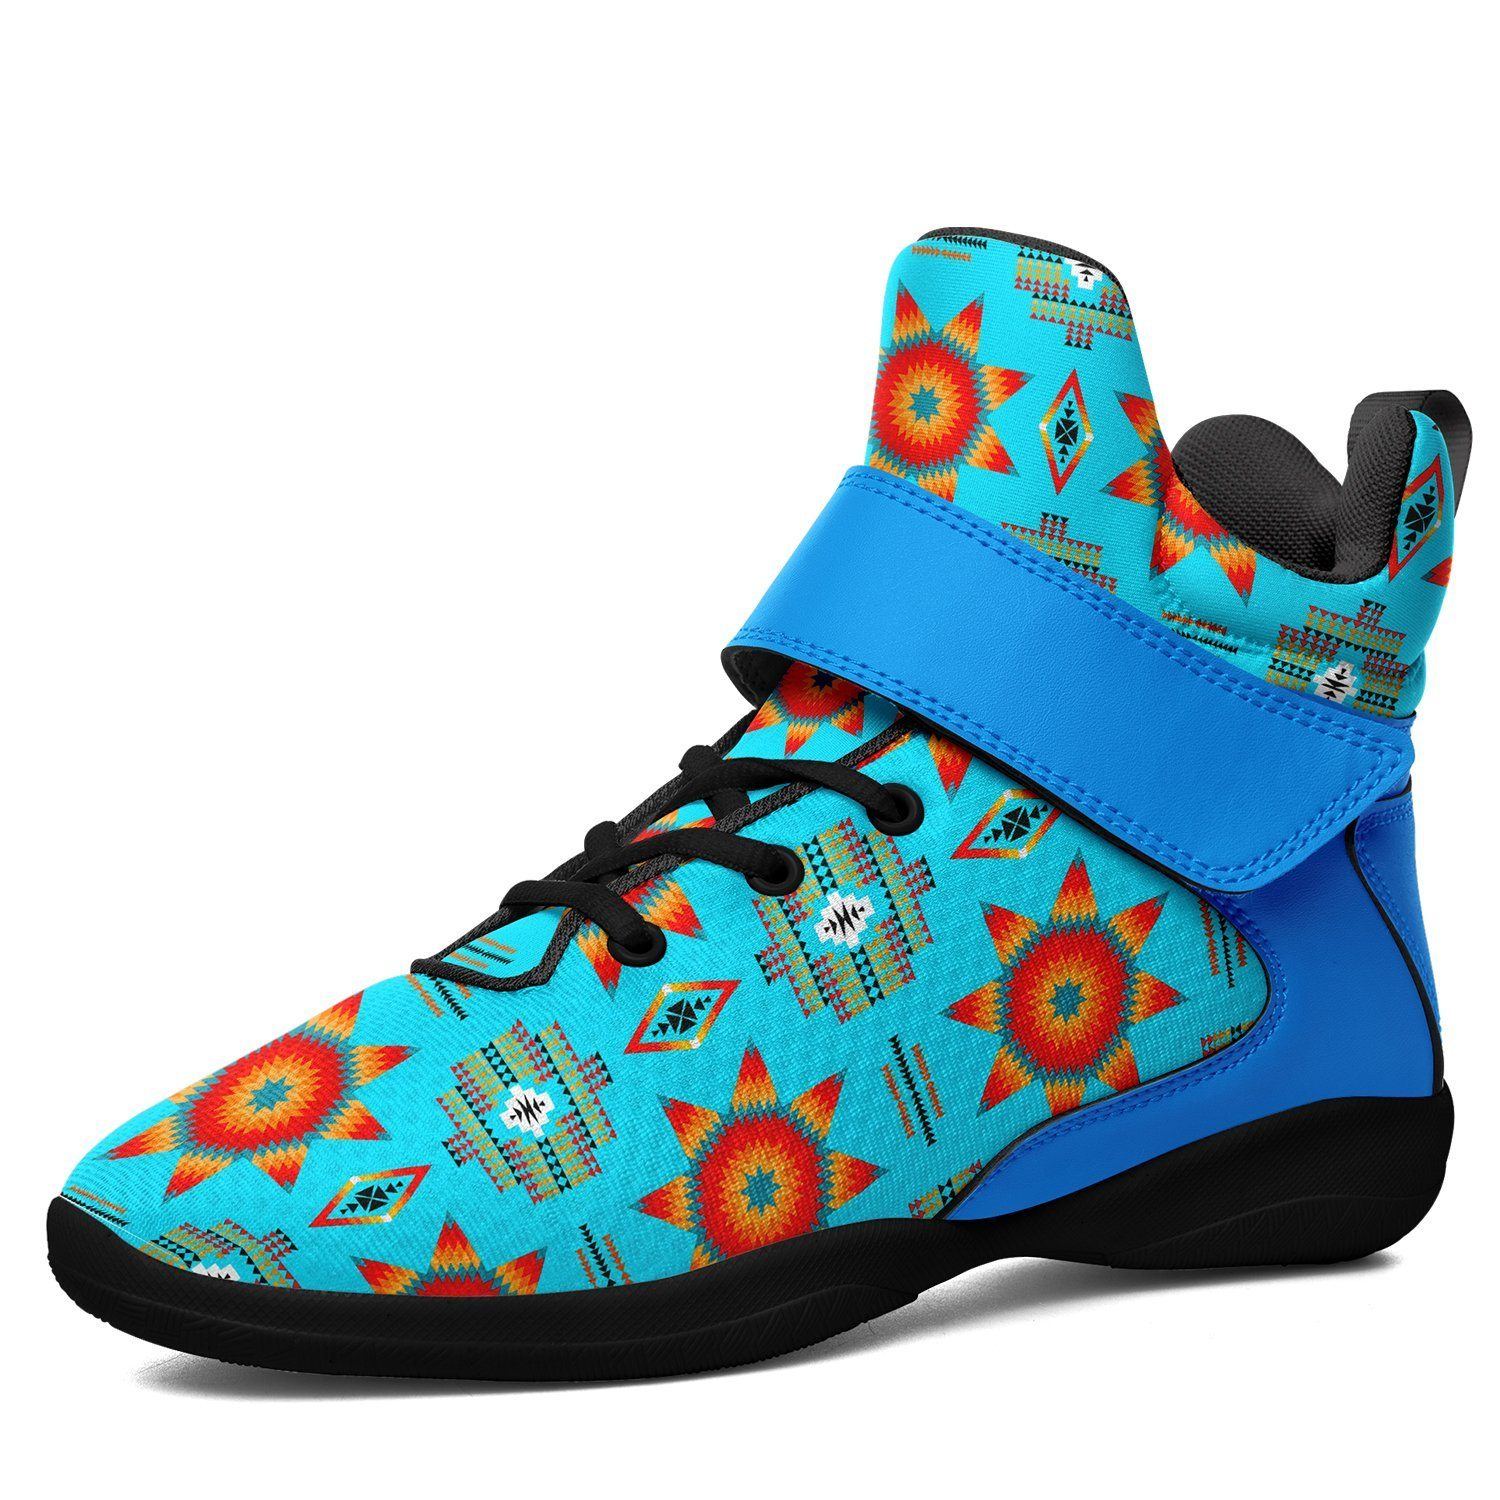 Rising Star Harvest Moon Kid's Ipottaa Basketball / Sport High Top Shoes 49 Dzine US Child 12.5 / EUR 30 Black Sole with Light Blue Strap 